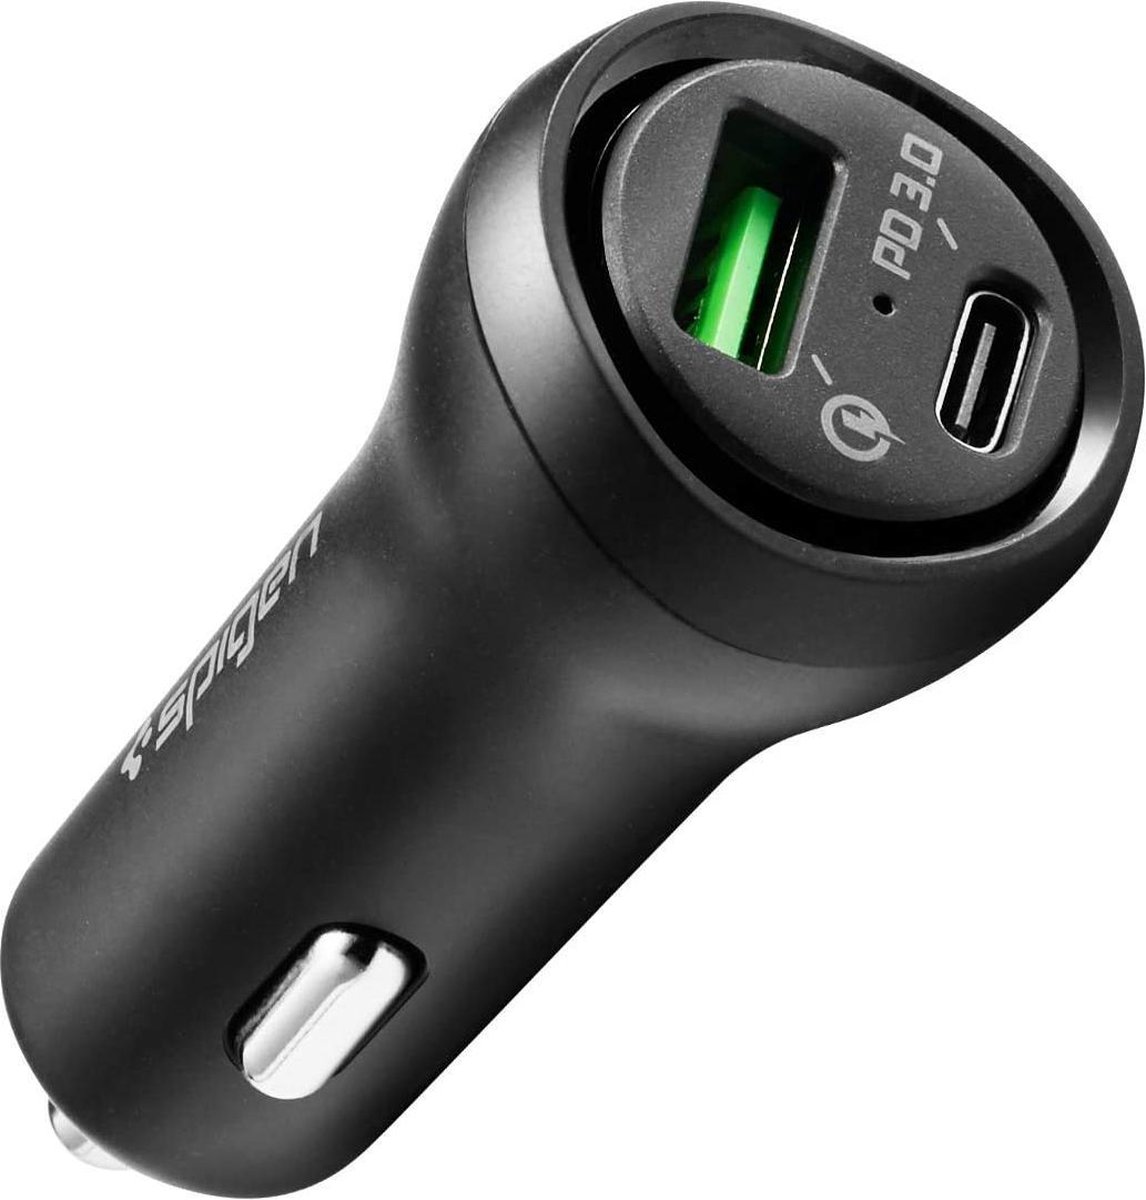 USB-C Power Drive & Quick Charge Car Charger - Zwart